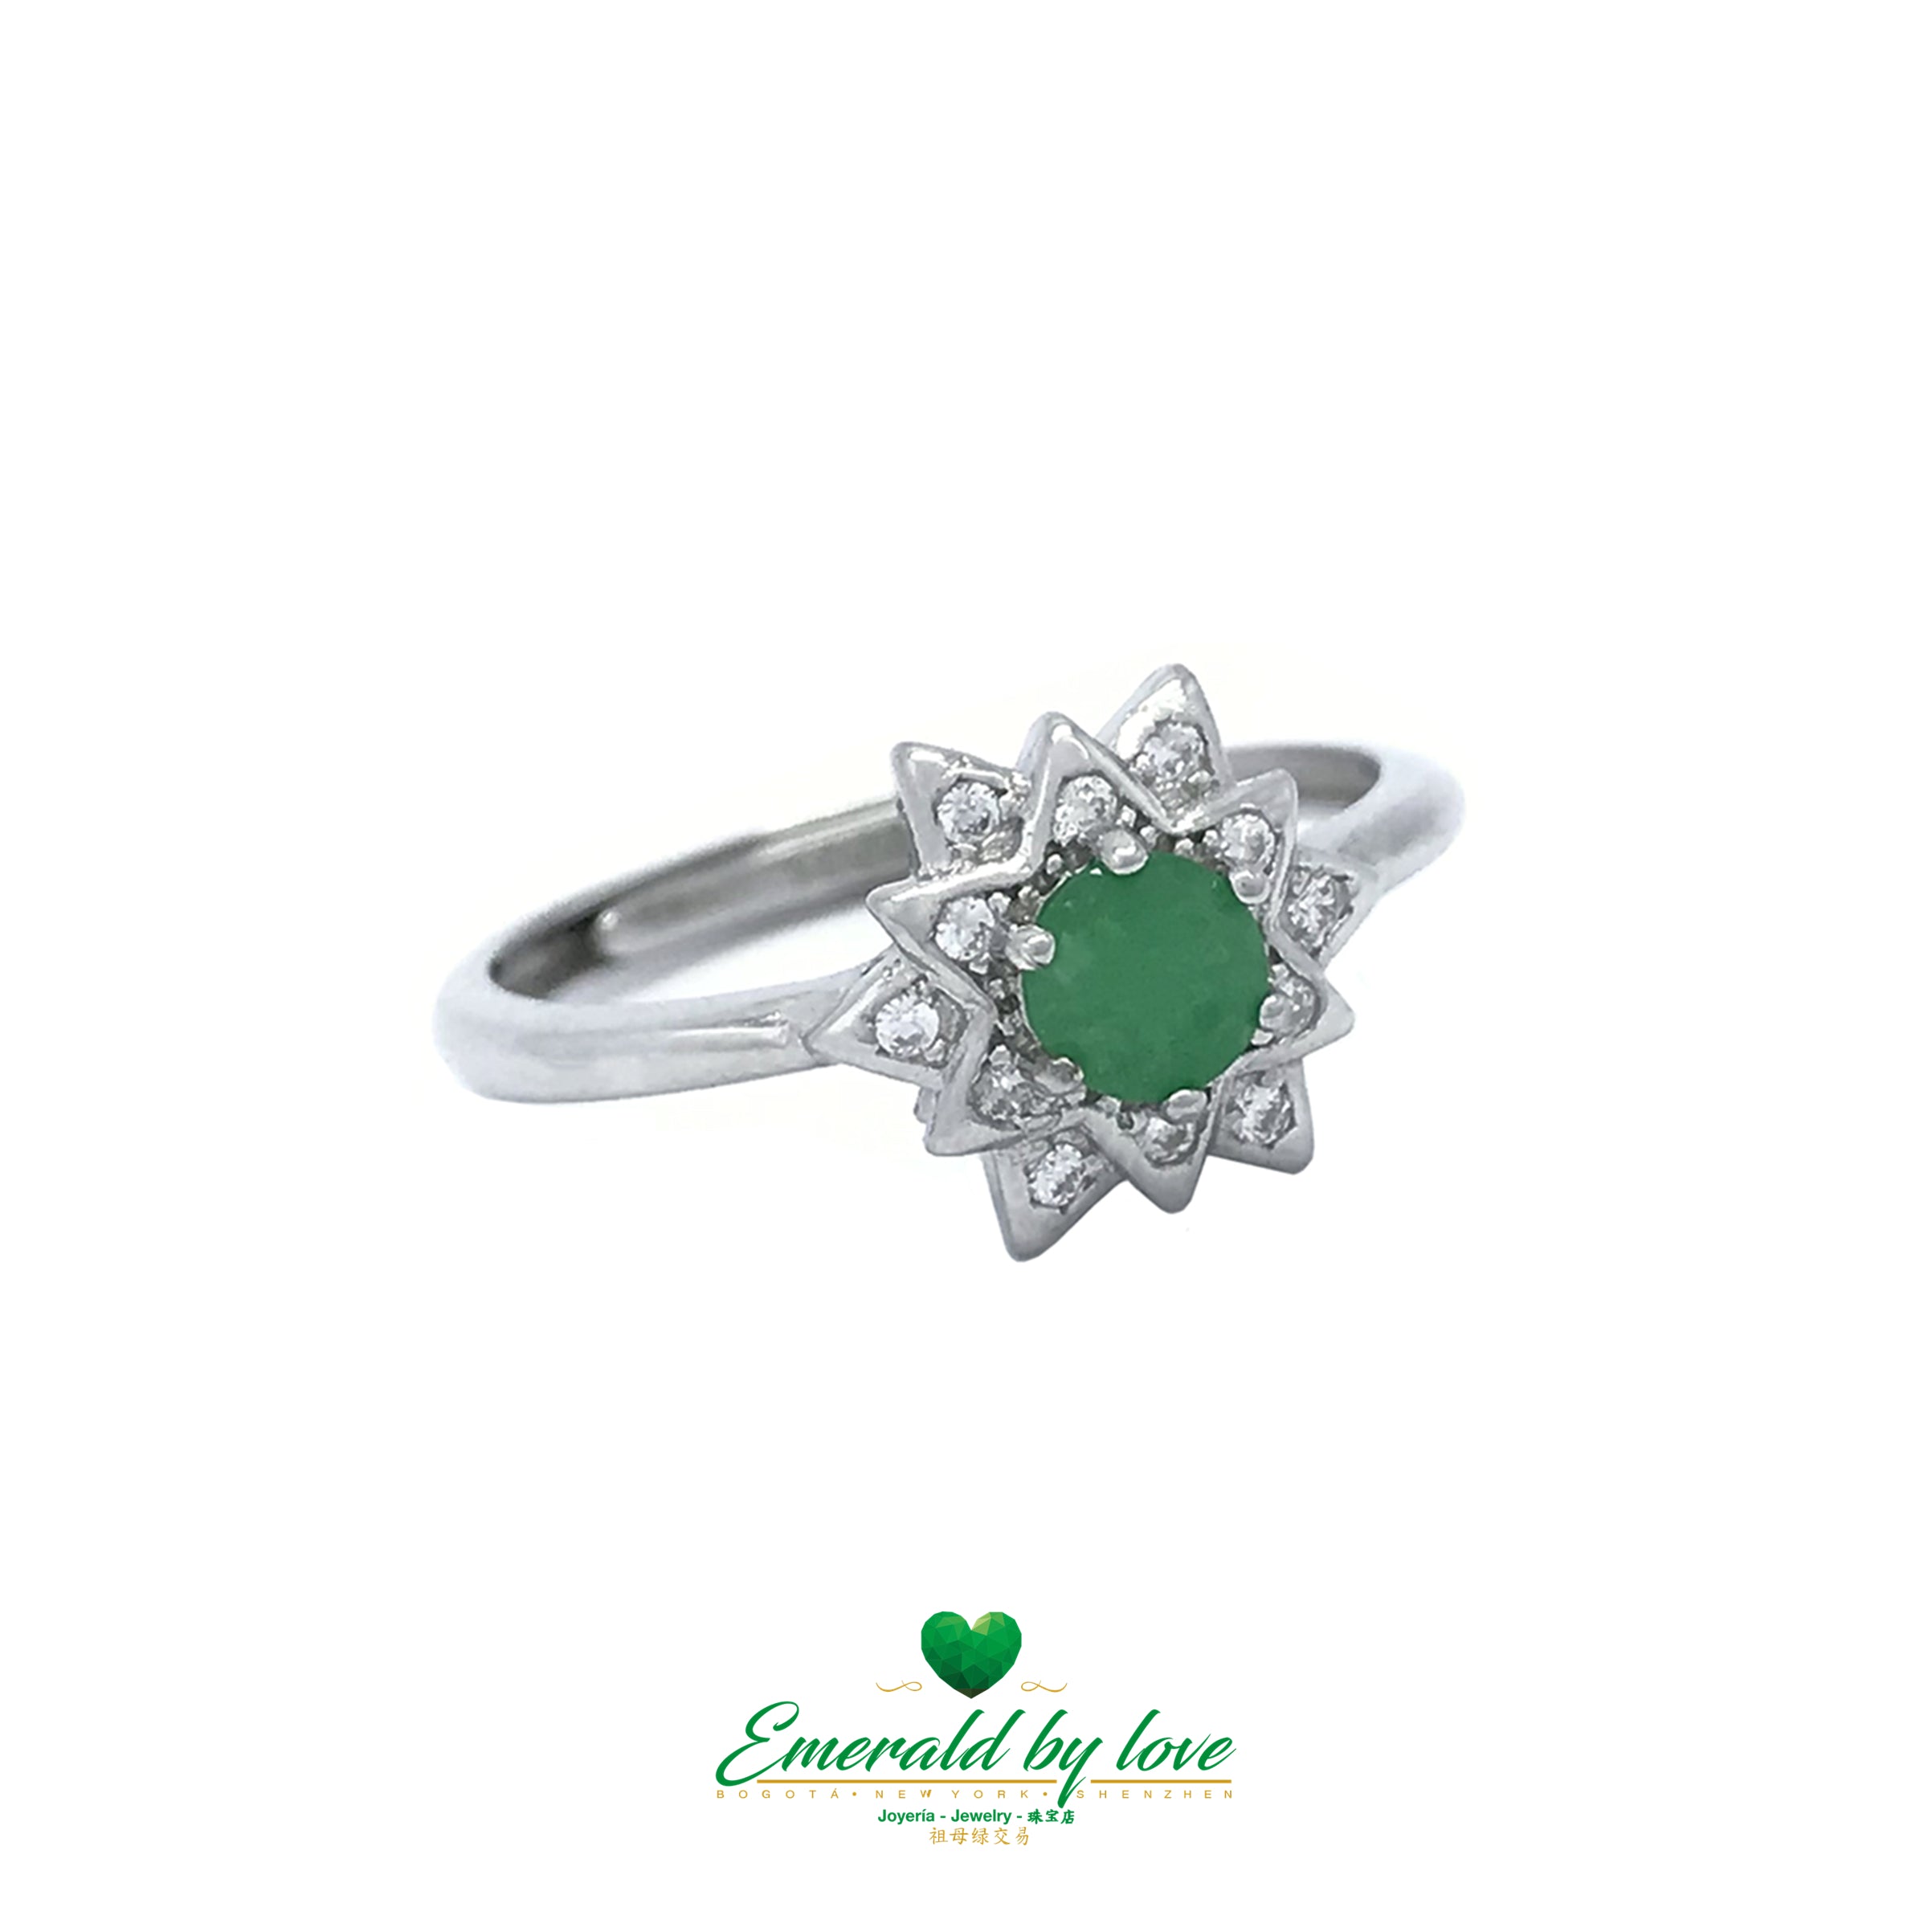 Silver Floral Cascade Ring with Round Central Emerald: Nature's Elegance